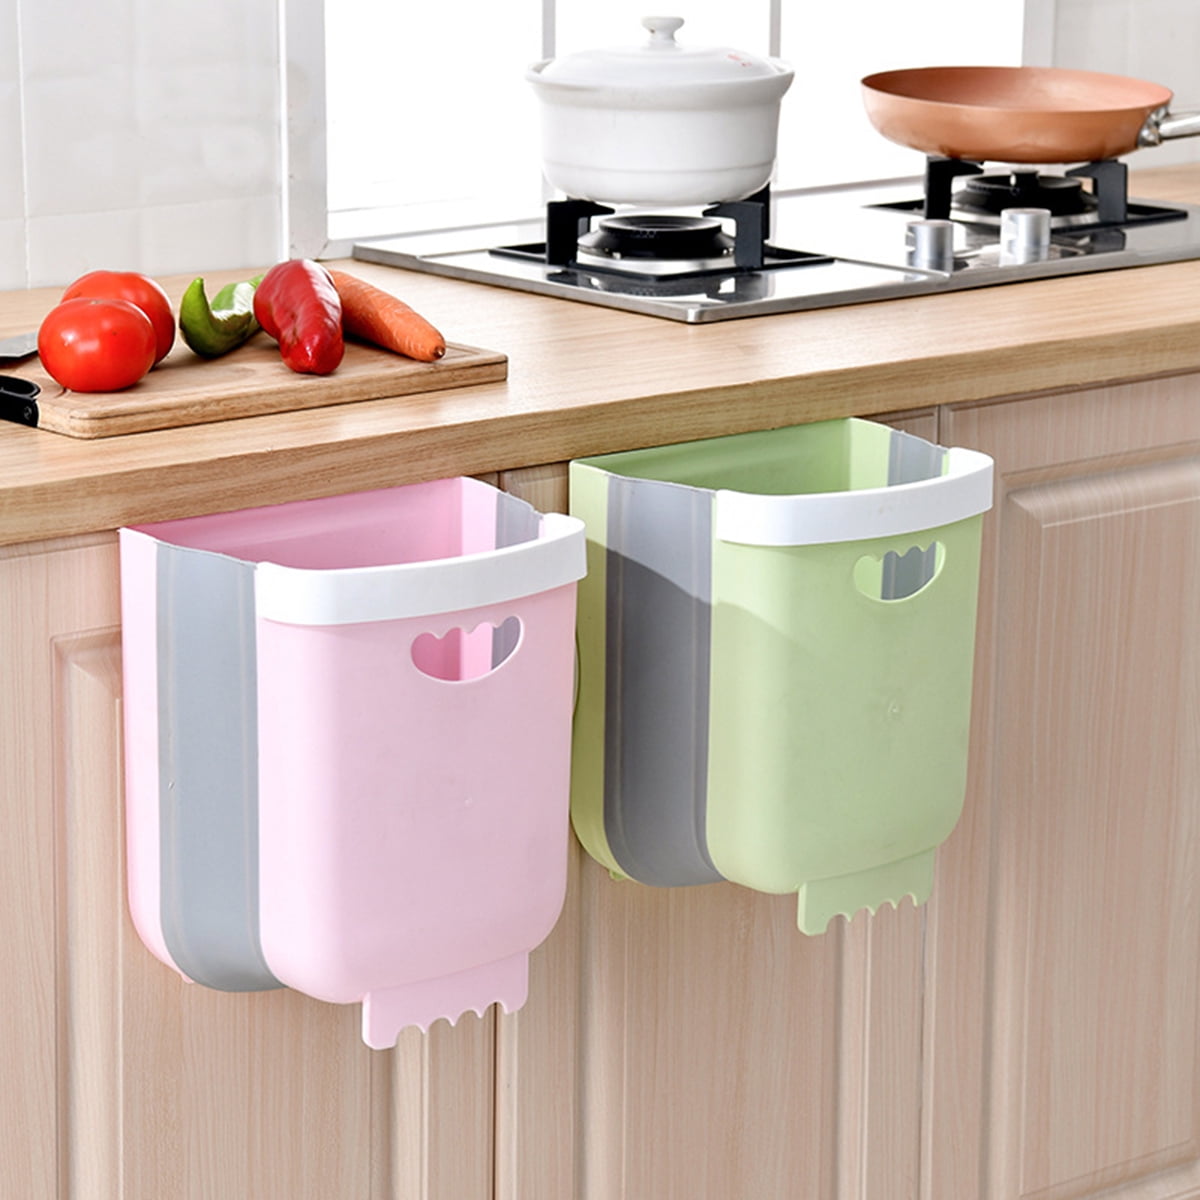 Foldable Plastic Car Bathroom Waste Basket ONO BLUE Folding Trash Can Hanging Garbage Can for Kitchen Cabinet Door L-White Wall Mounted Folding Waste Bin